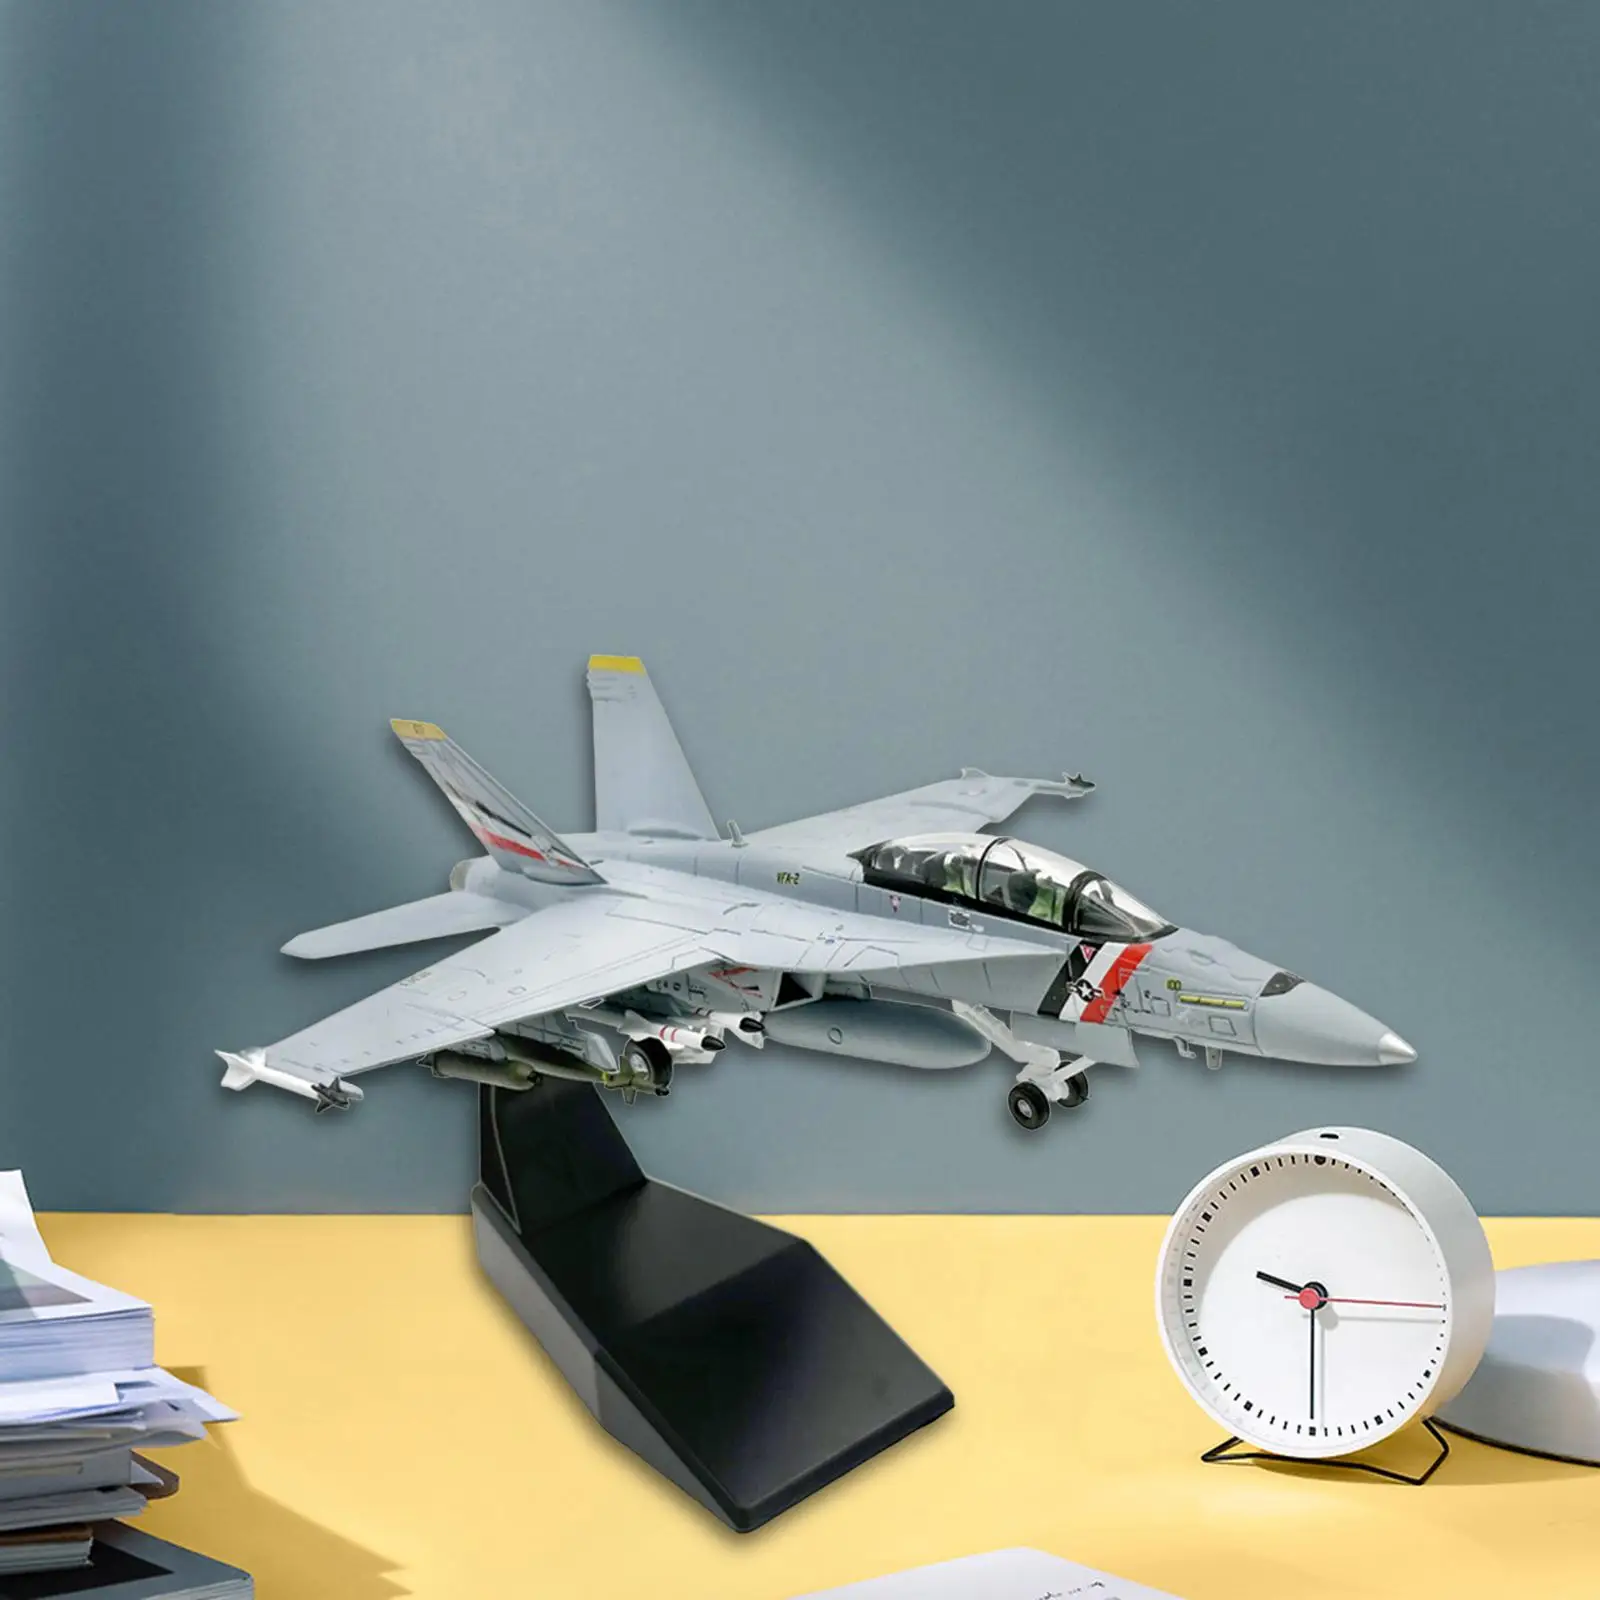 Diecast Alloy Model 1:100 Jet Aircraft Collection Fighter Ornament for TV Cabinet Office Bookshelf Tabletop Decor